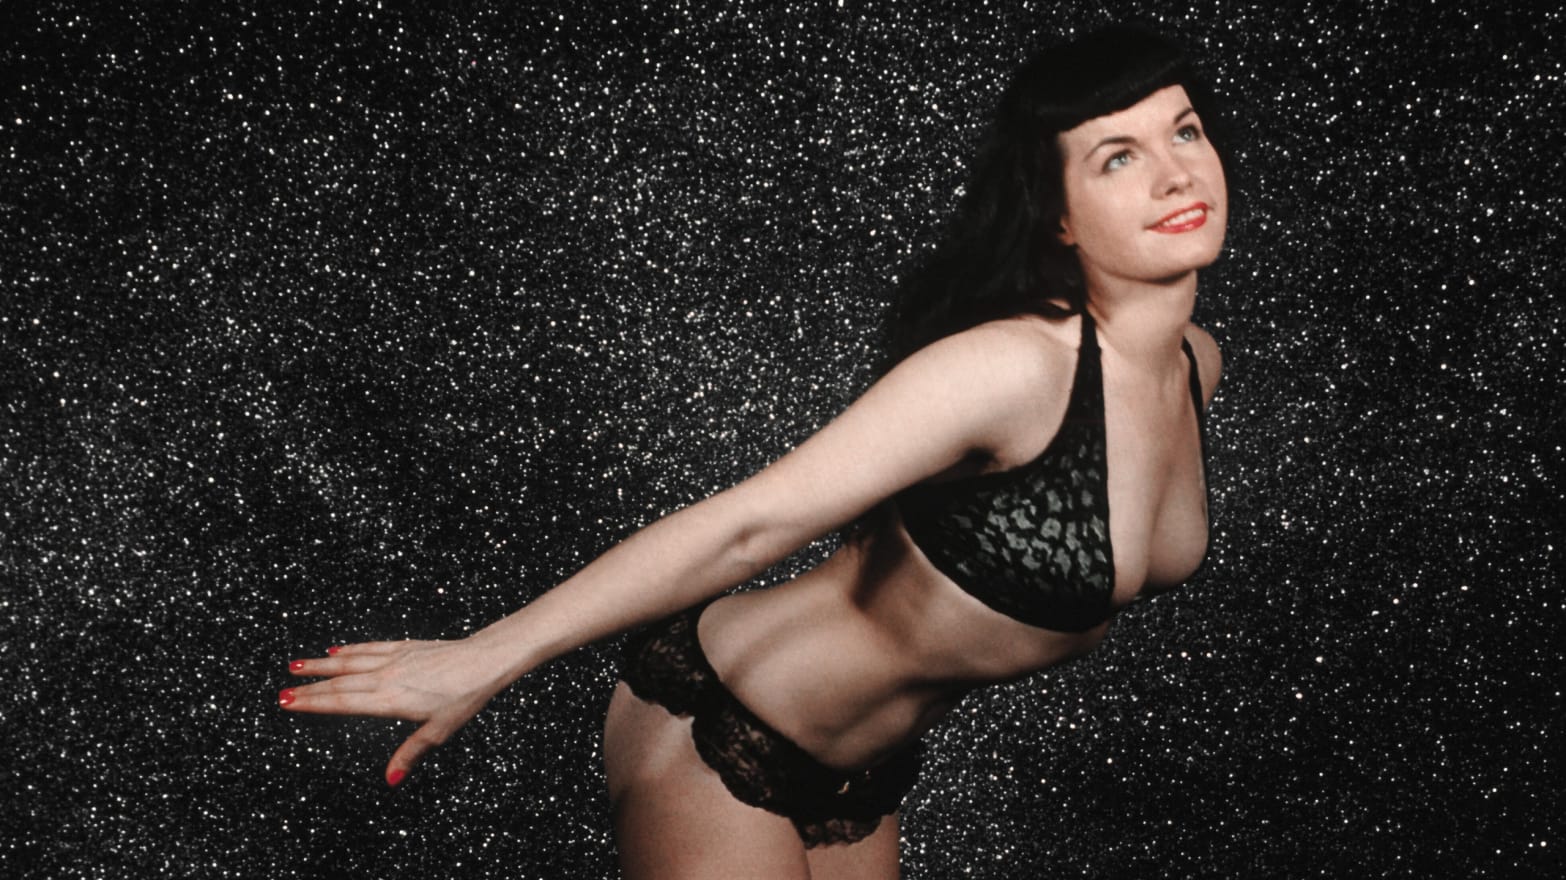 Bettie Page Reveals All, A Close-Up Look at the Pinup Goddess and Sexual Icon